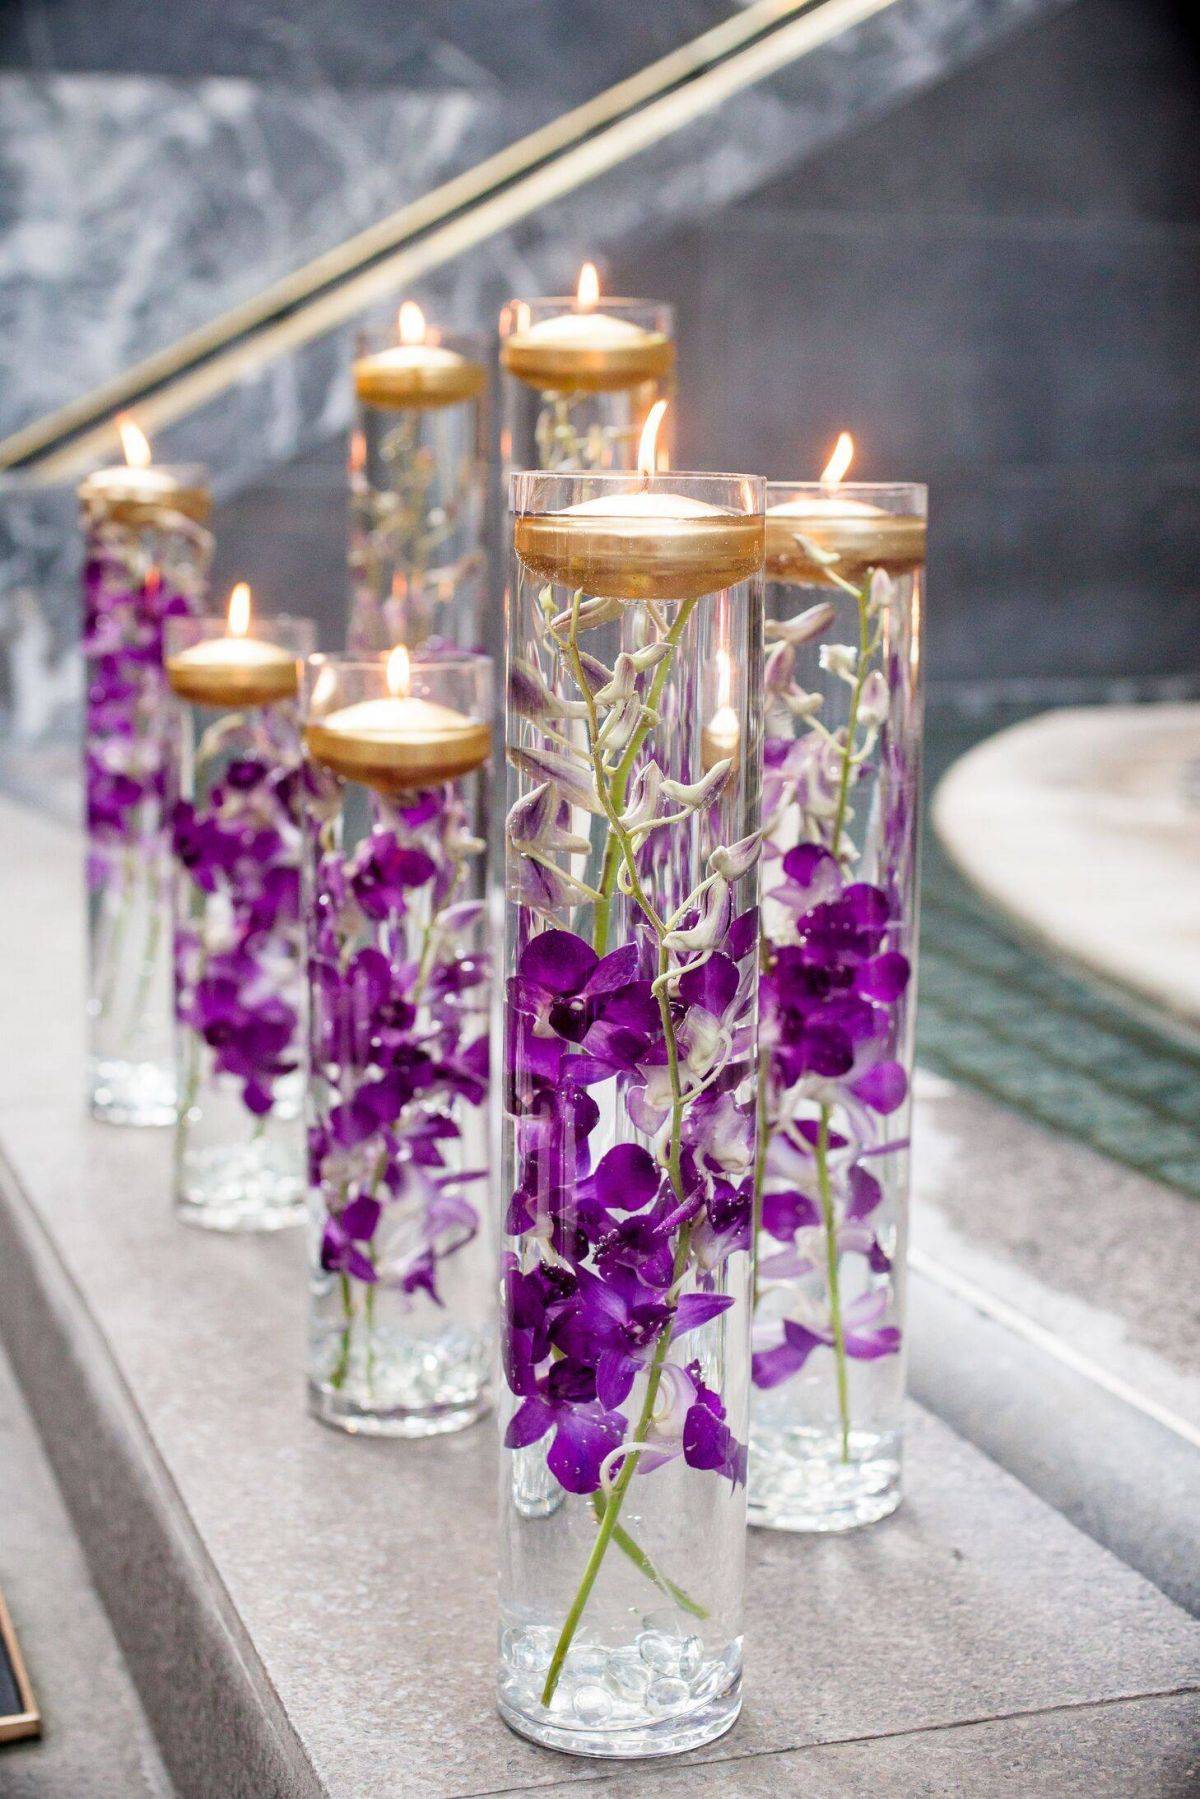 Glass Vases Wedding Centerpiece With Purple Orchids and Floating Candles